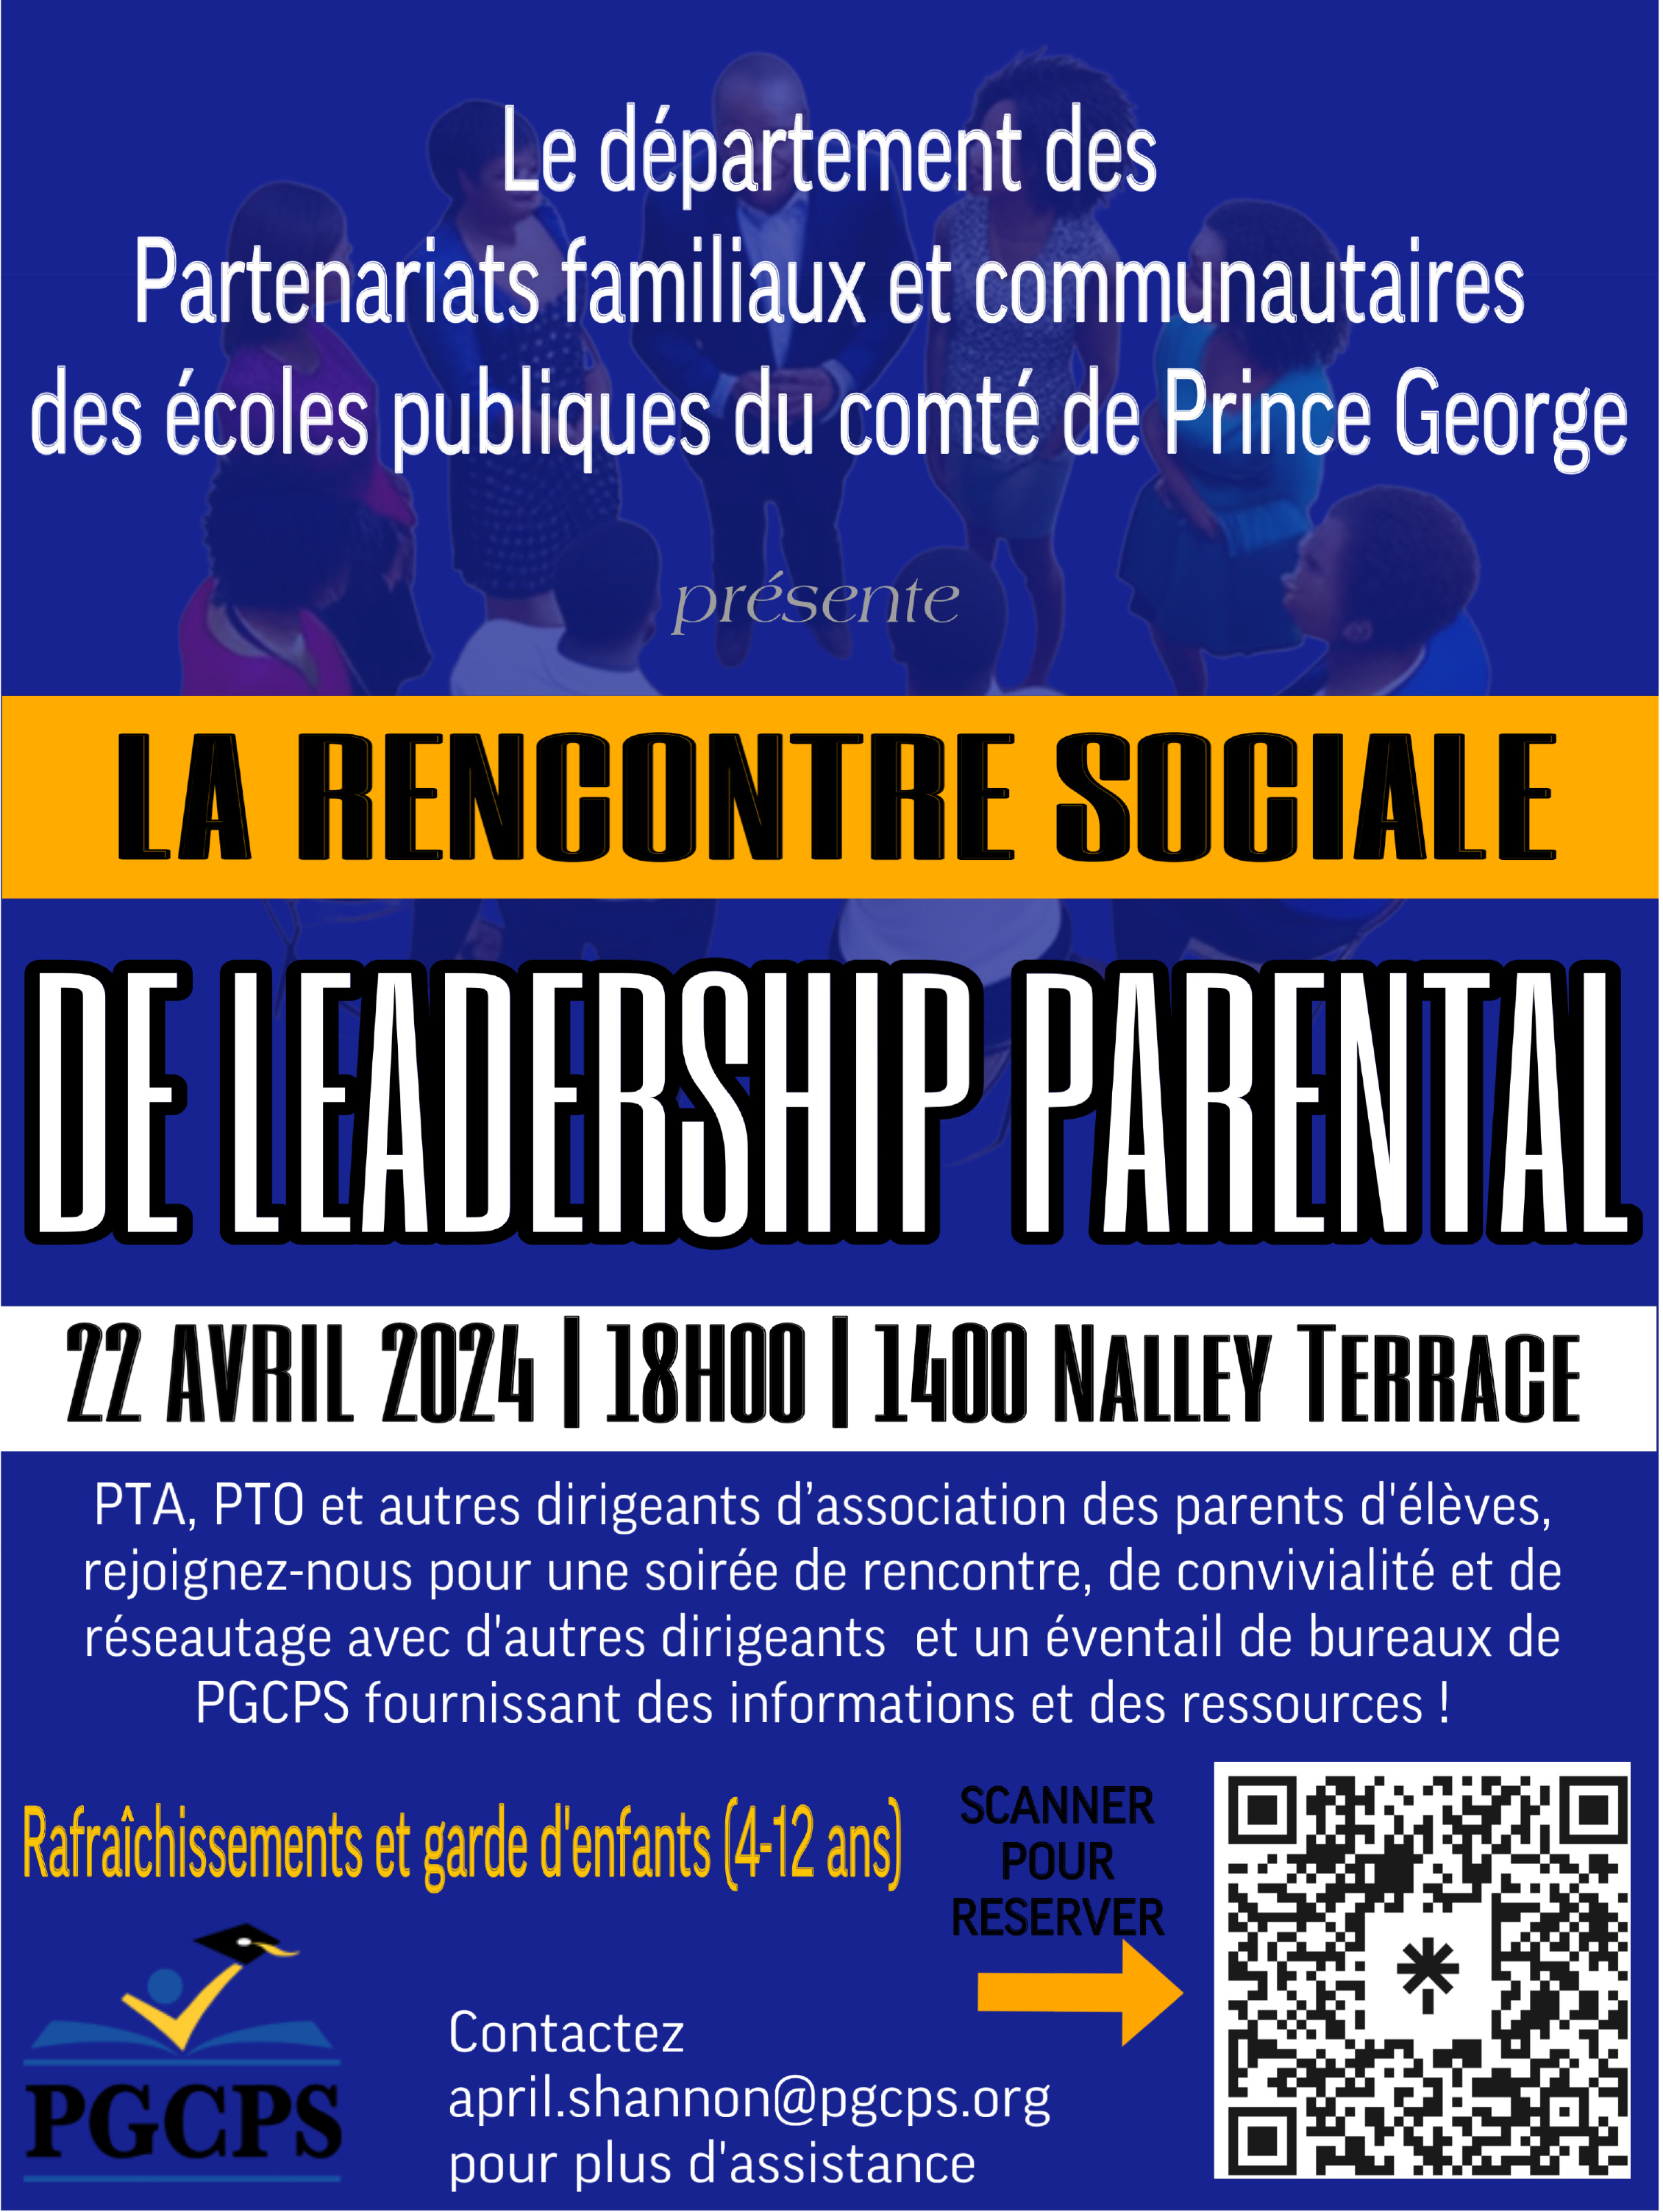 Family and Community Partnerships Presents Parent Leadership Mixer flyer - French.jpg